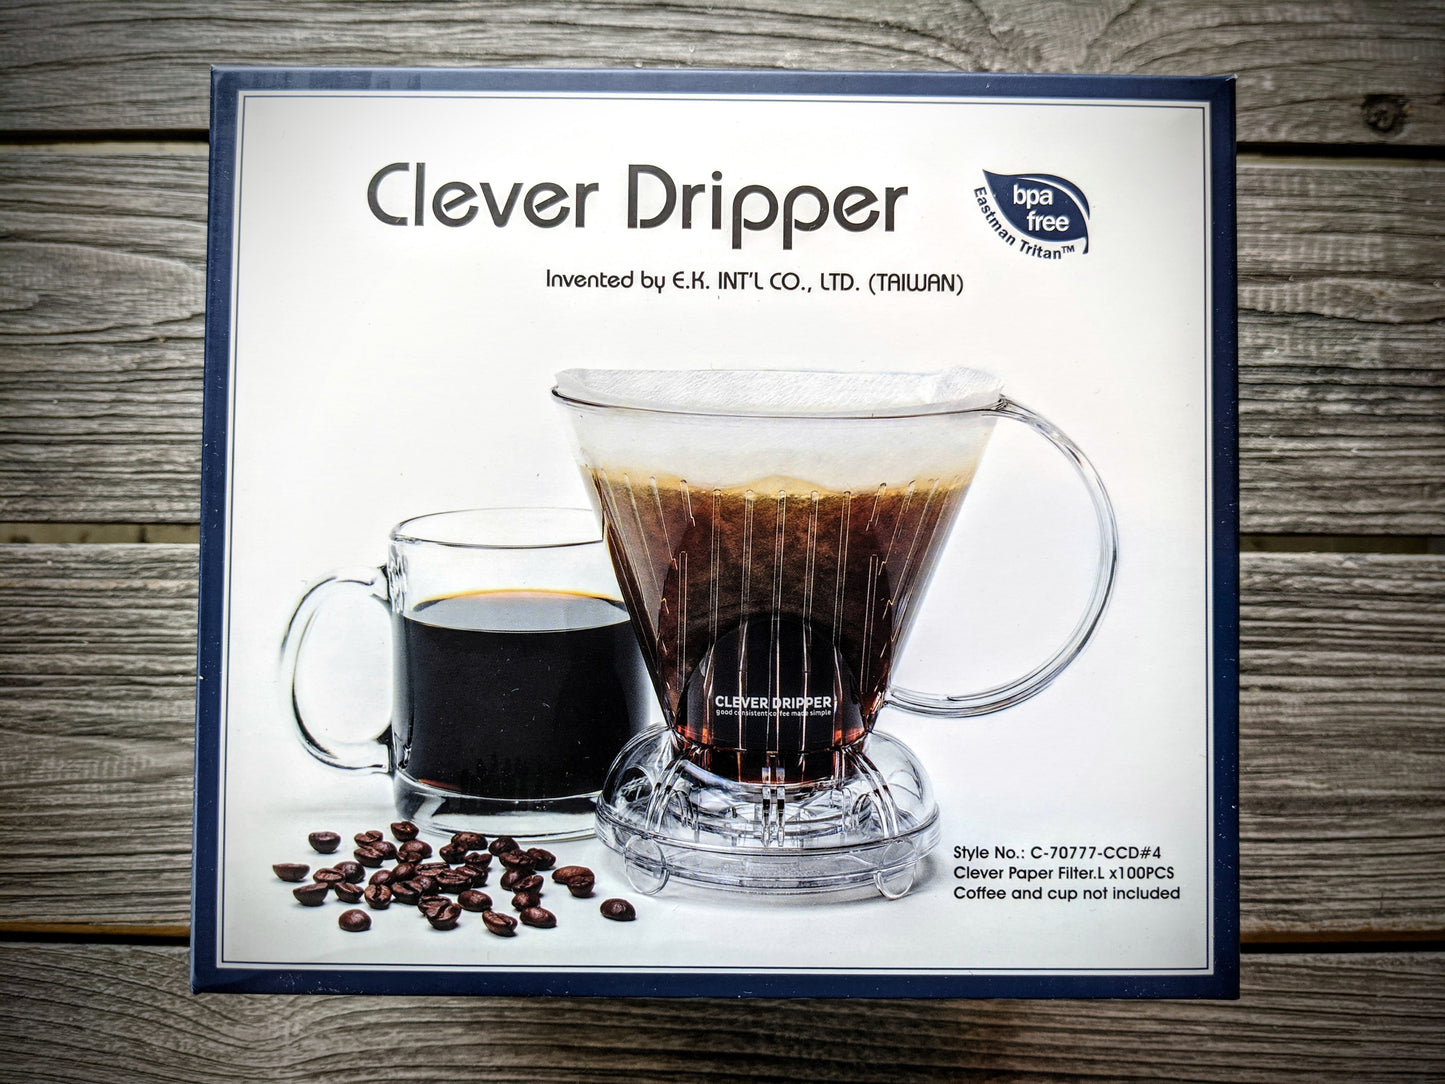 The Clever Dripper